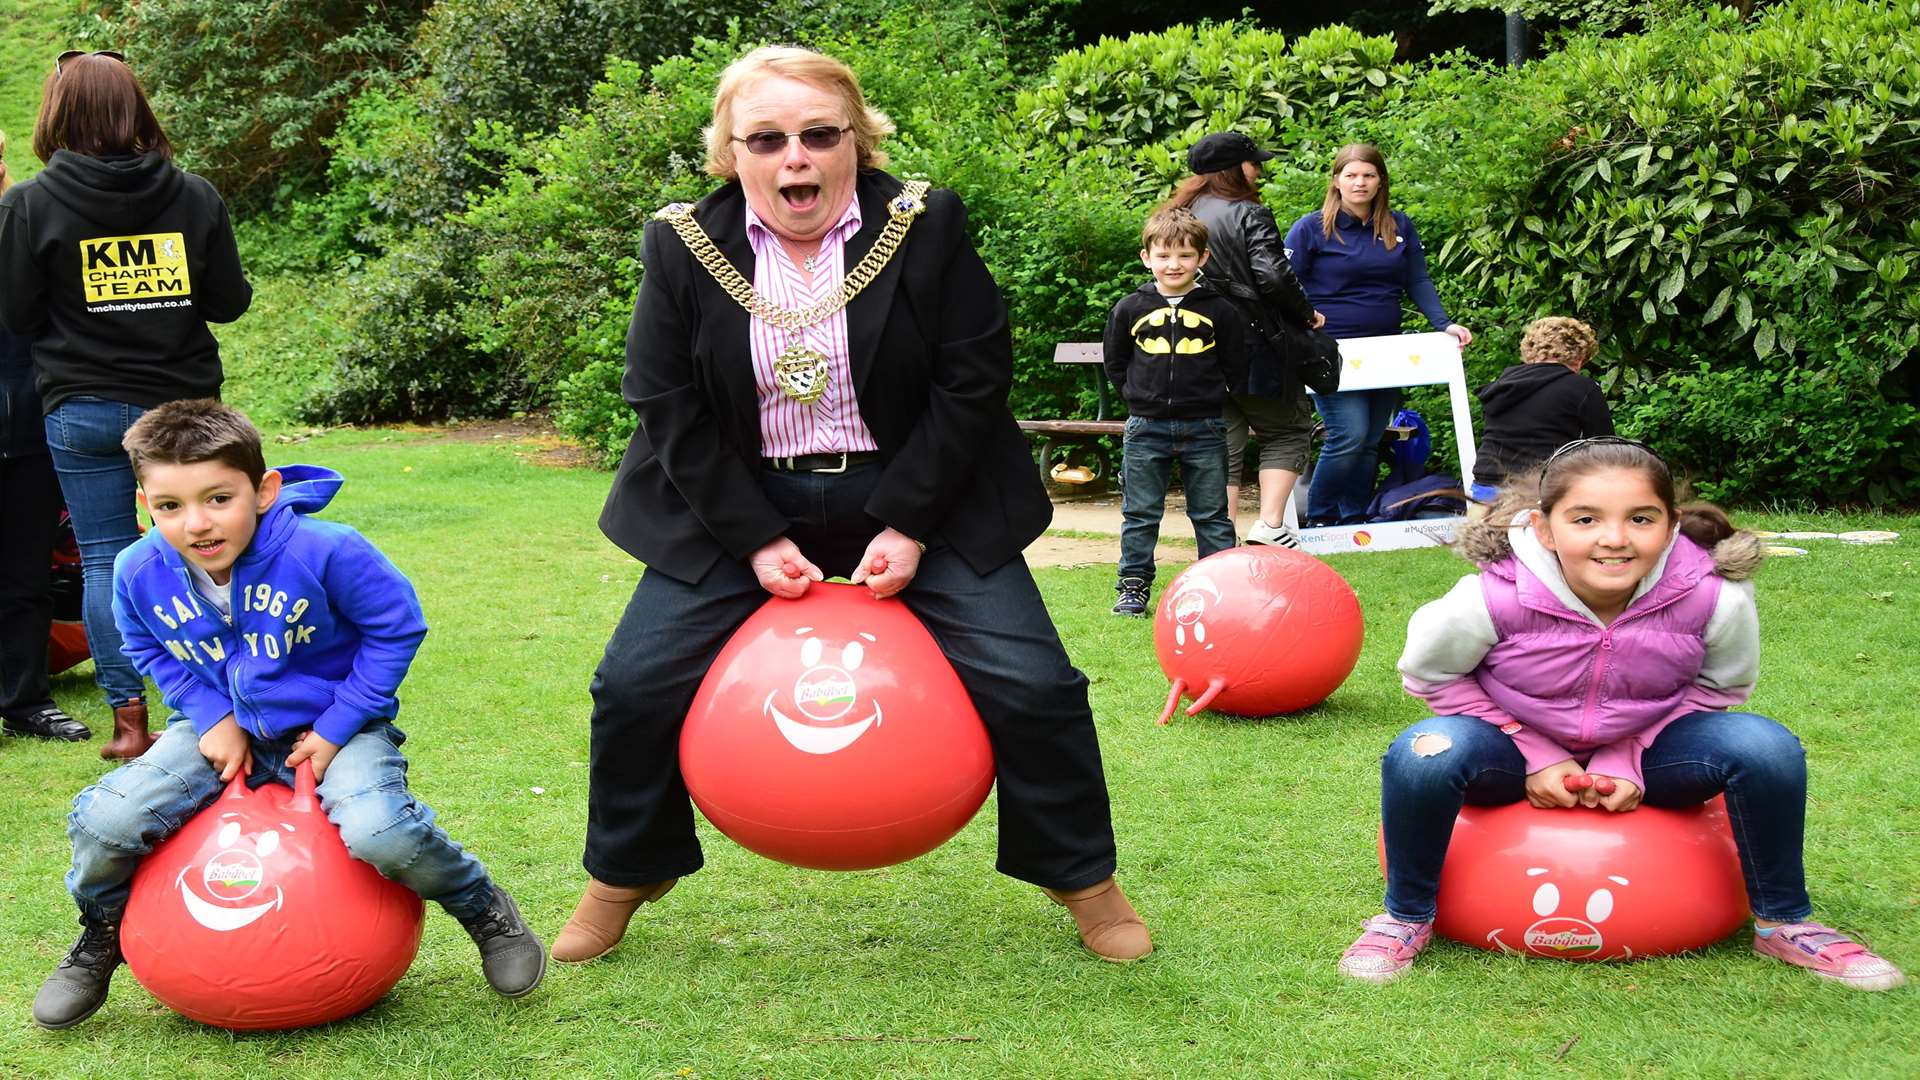 The 2016 event saw then Lord Mayor of Canterbury Cllr Sally Waters try out the Mini Babybel Space Hoppers.